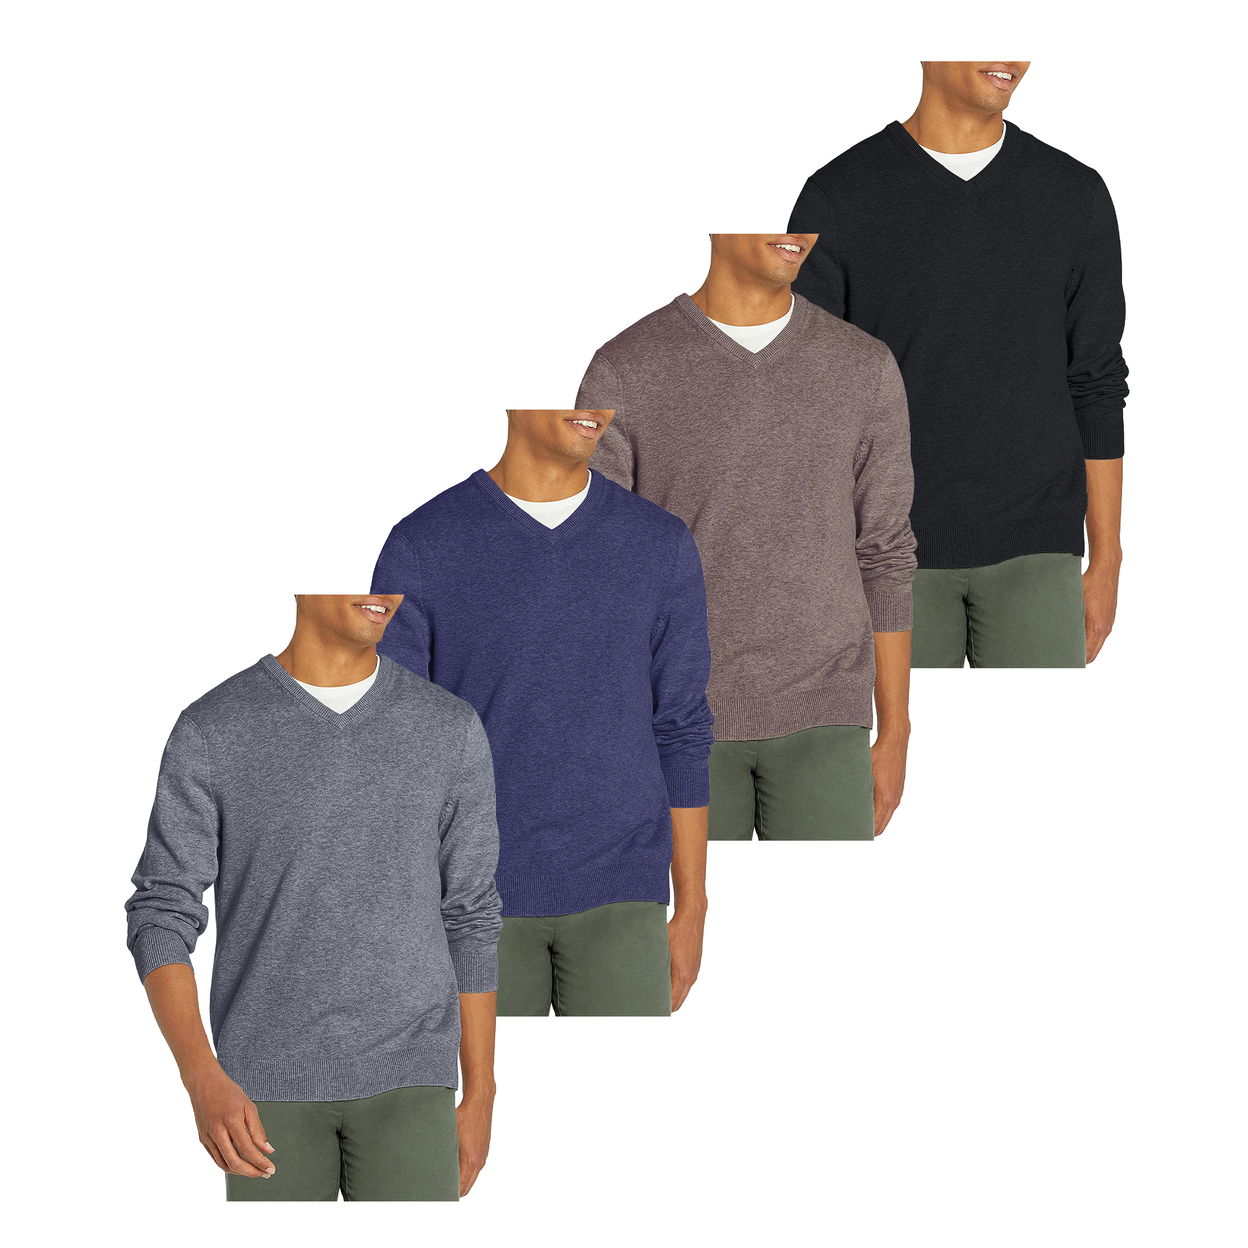 Multi-Pack: Men's Casual Ultra Soft Slim Fit Warm Knit V-Neck Sweater - 2-pack, X-large